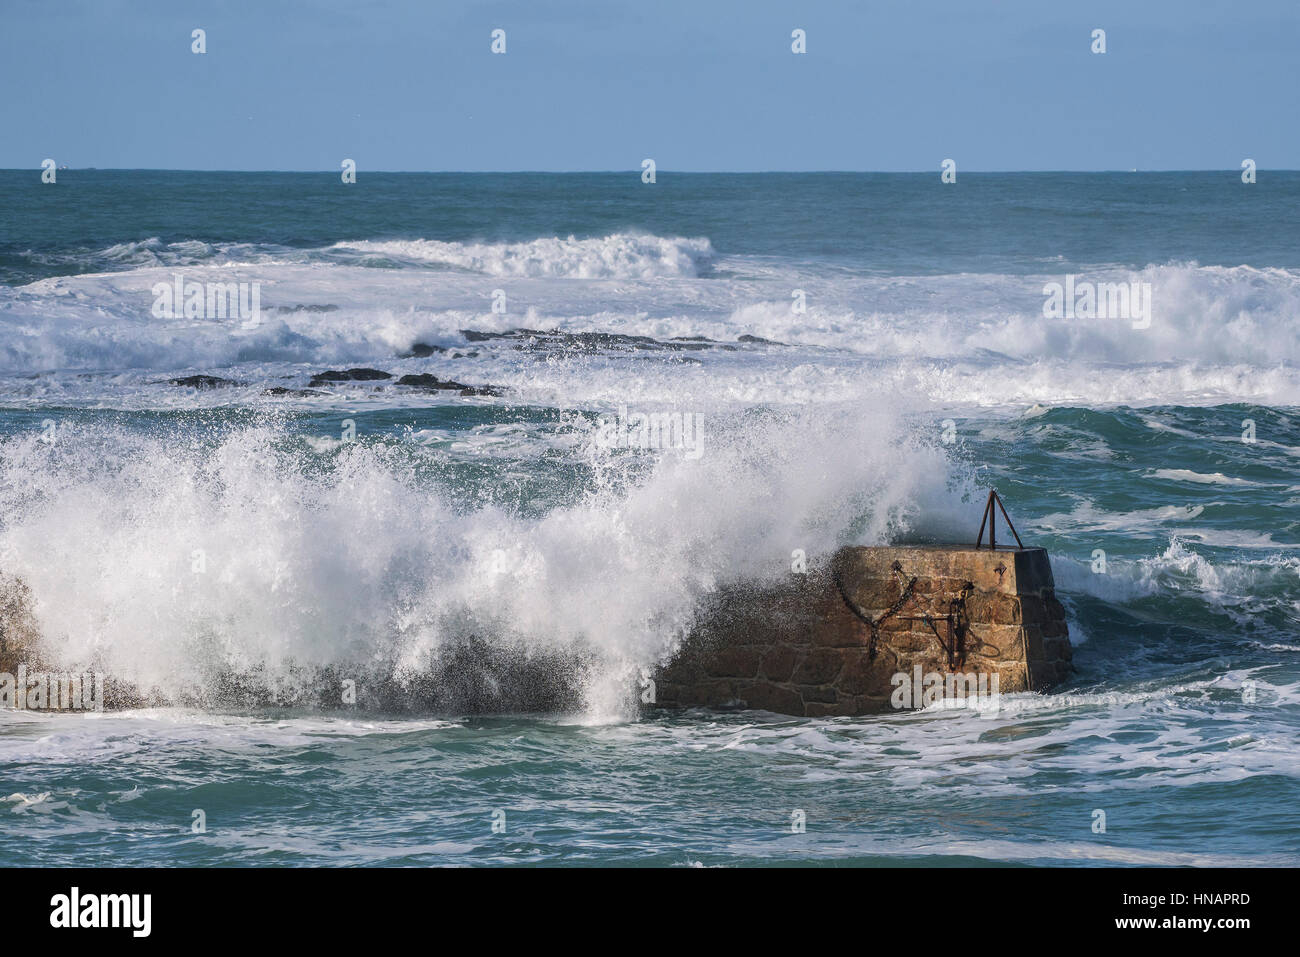 High winds drive waves over the top of the breakwater in Sennen Cove, Cornwall, England. UK Weather. Stock Photo